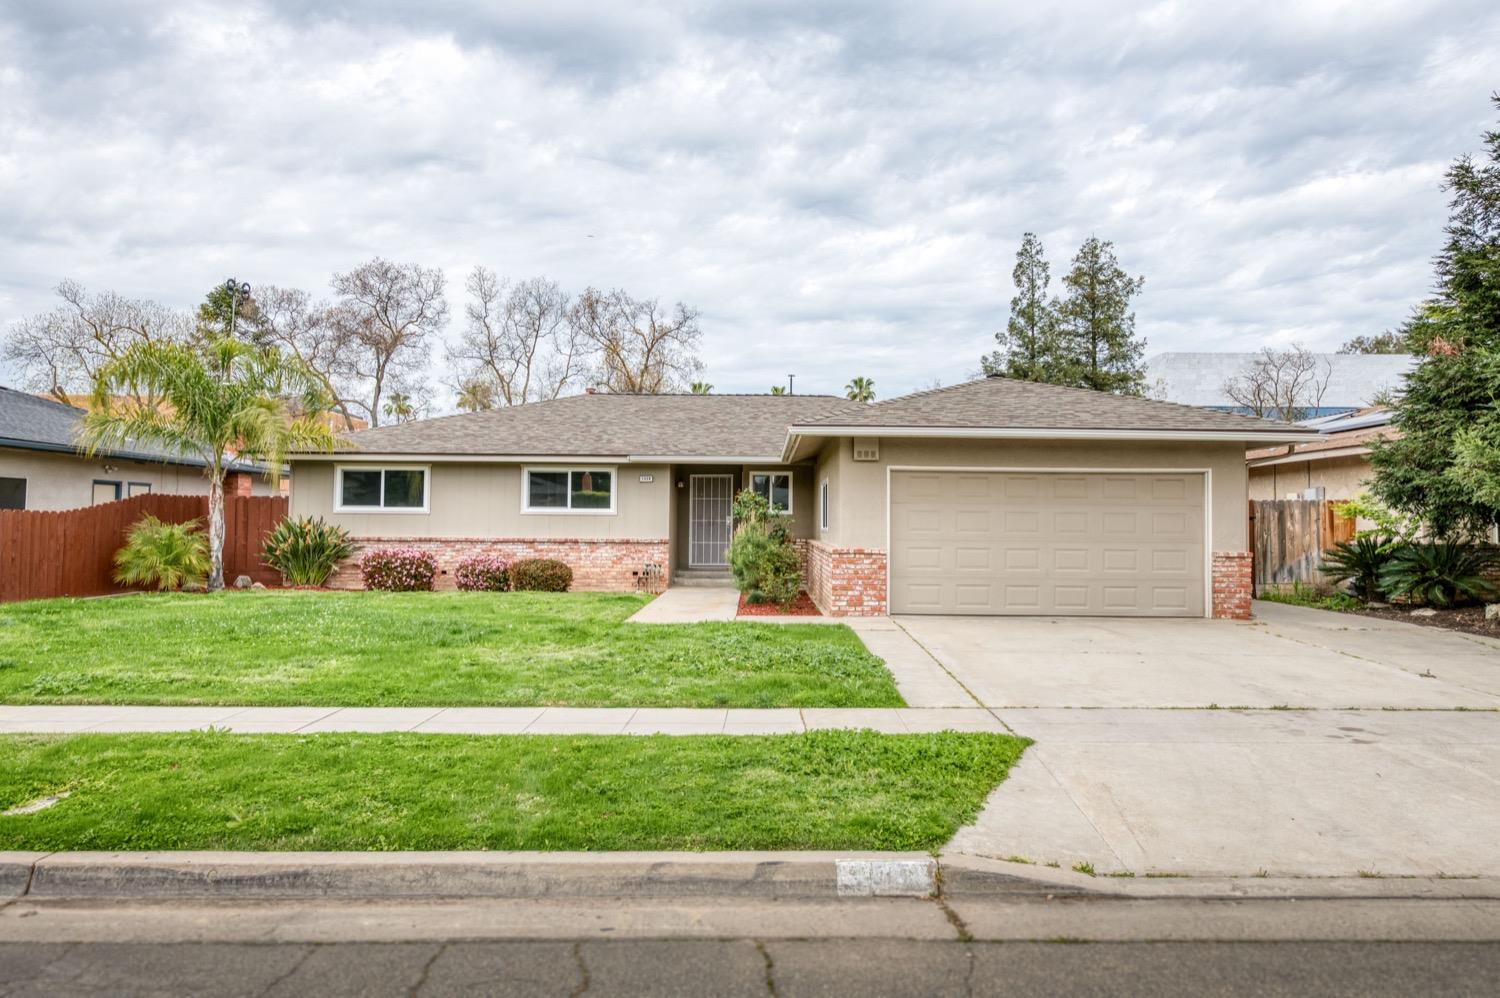 Photo of 1058 W Magill Ave in Fresno, CA